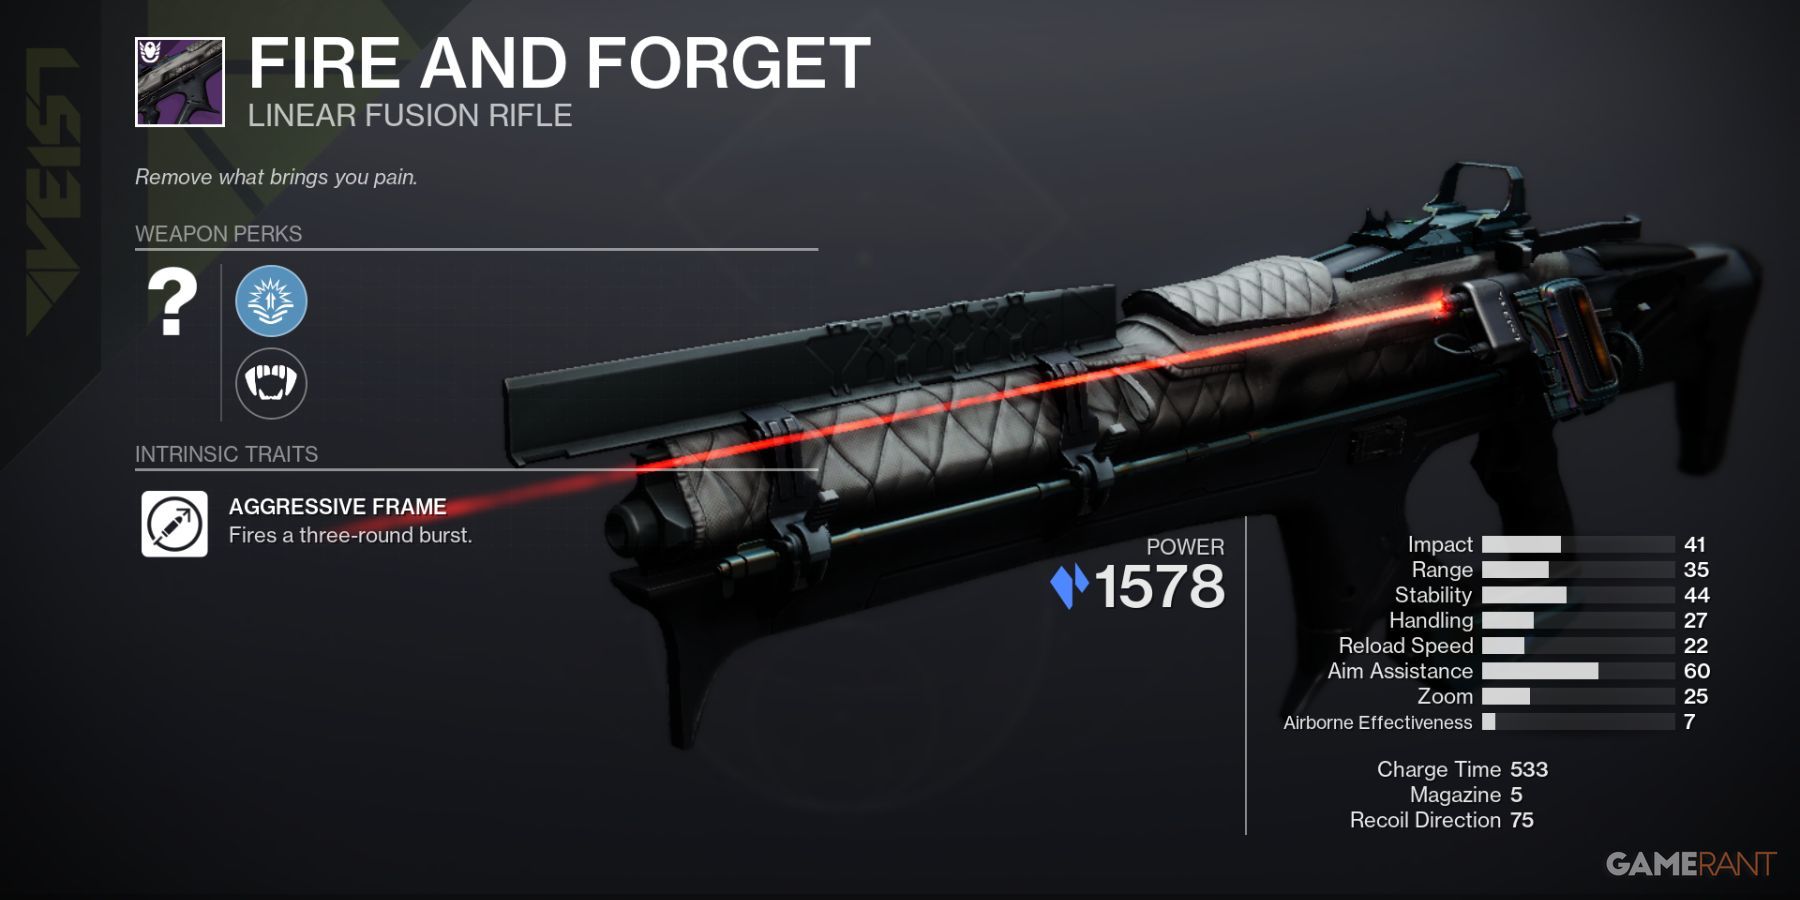 Destiny 2 Fire And Forget Linear Fusion Rifle